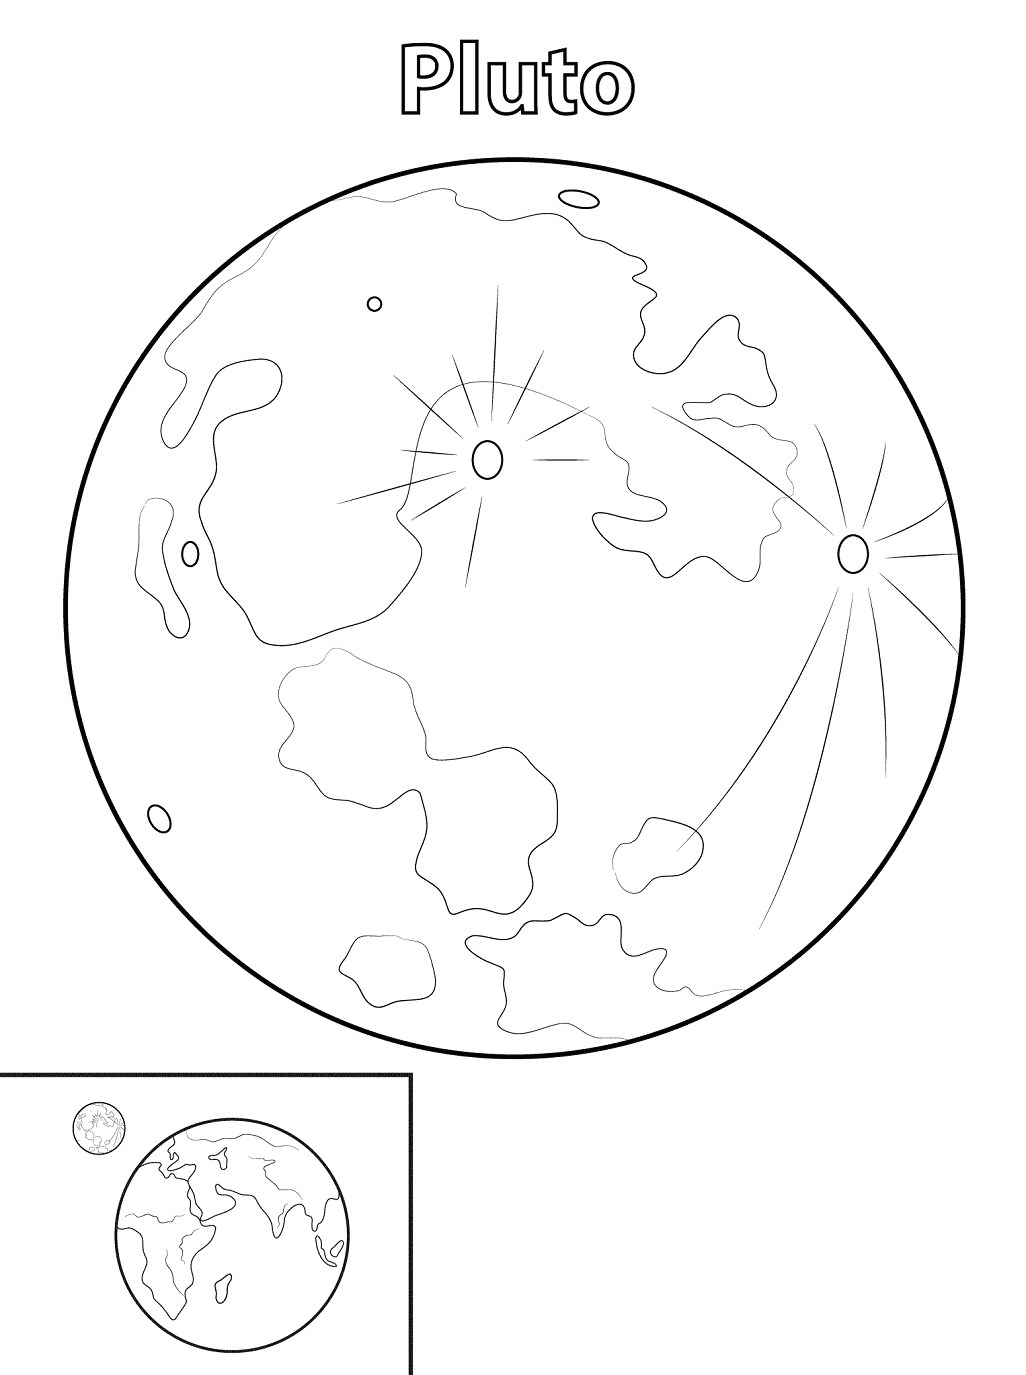 Pluto Planet Coloring Page